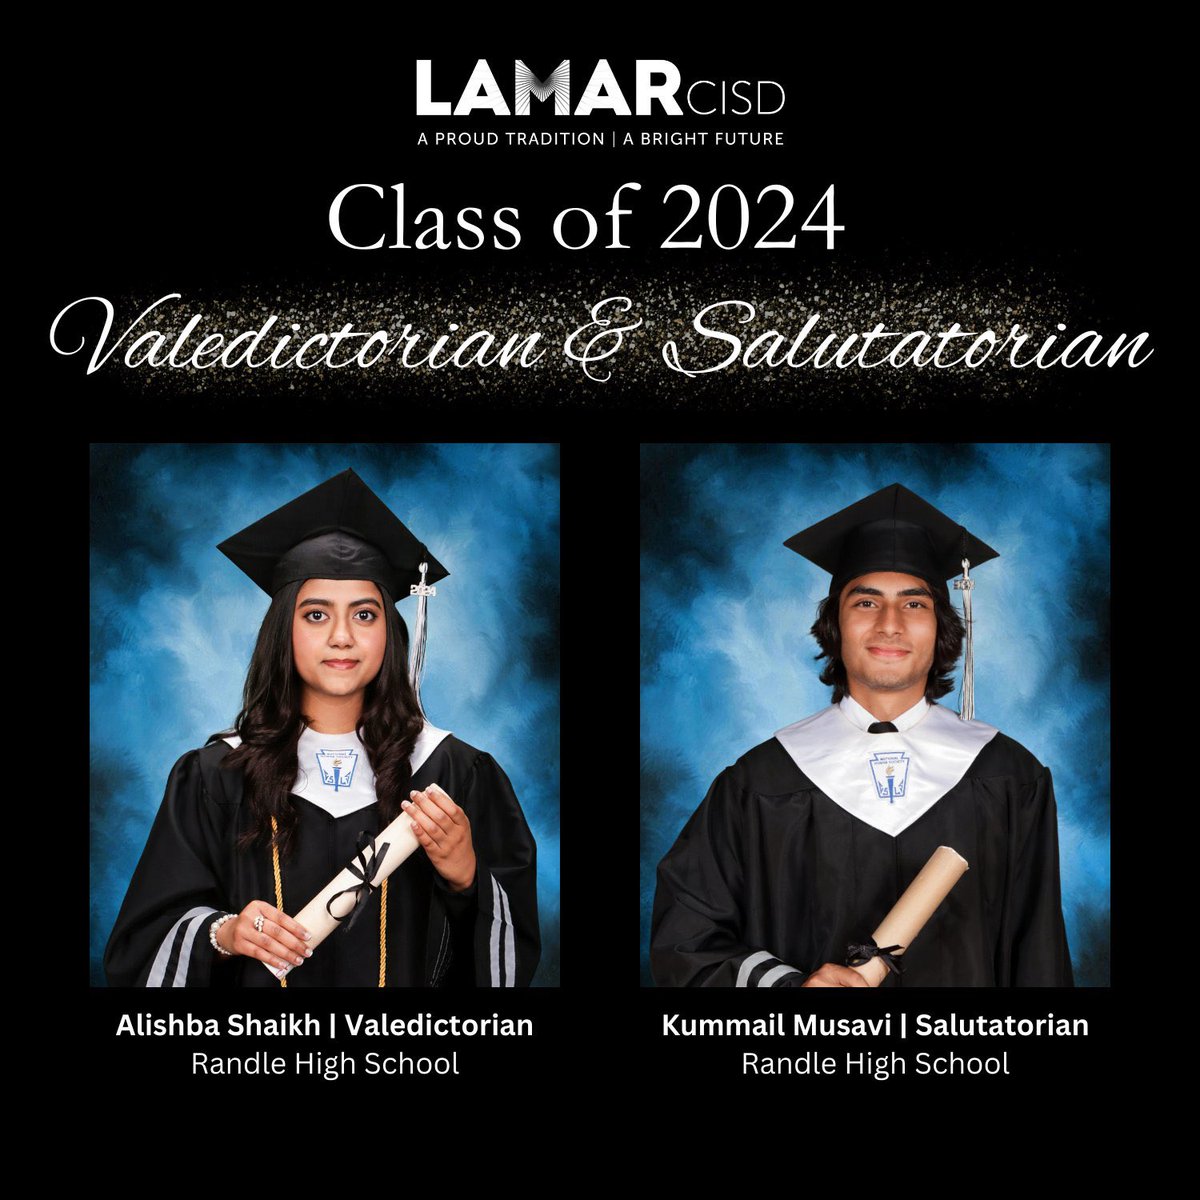 Introducing the Randle High School Class of 2024 Valedictorian & Salutatorian.🎉 Valedictorian Alishba Shaikh plans to attend Rice University and study computer science/electrical engineering. Salutatorian Kummail Musavi plans to attend the University of Texas and study biology.